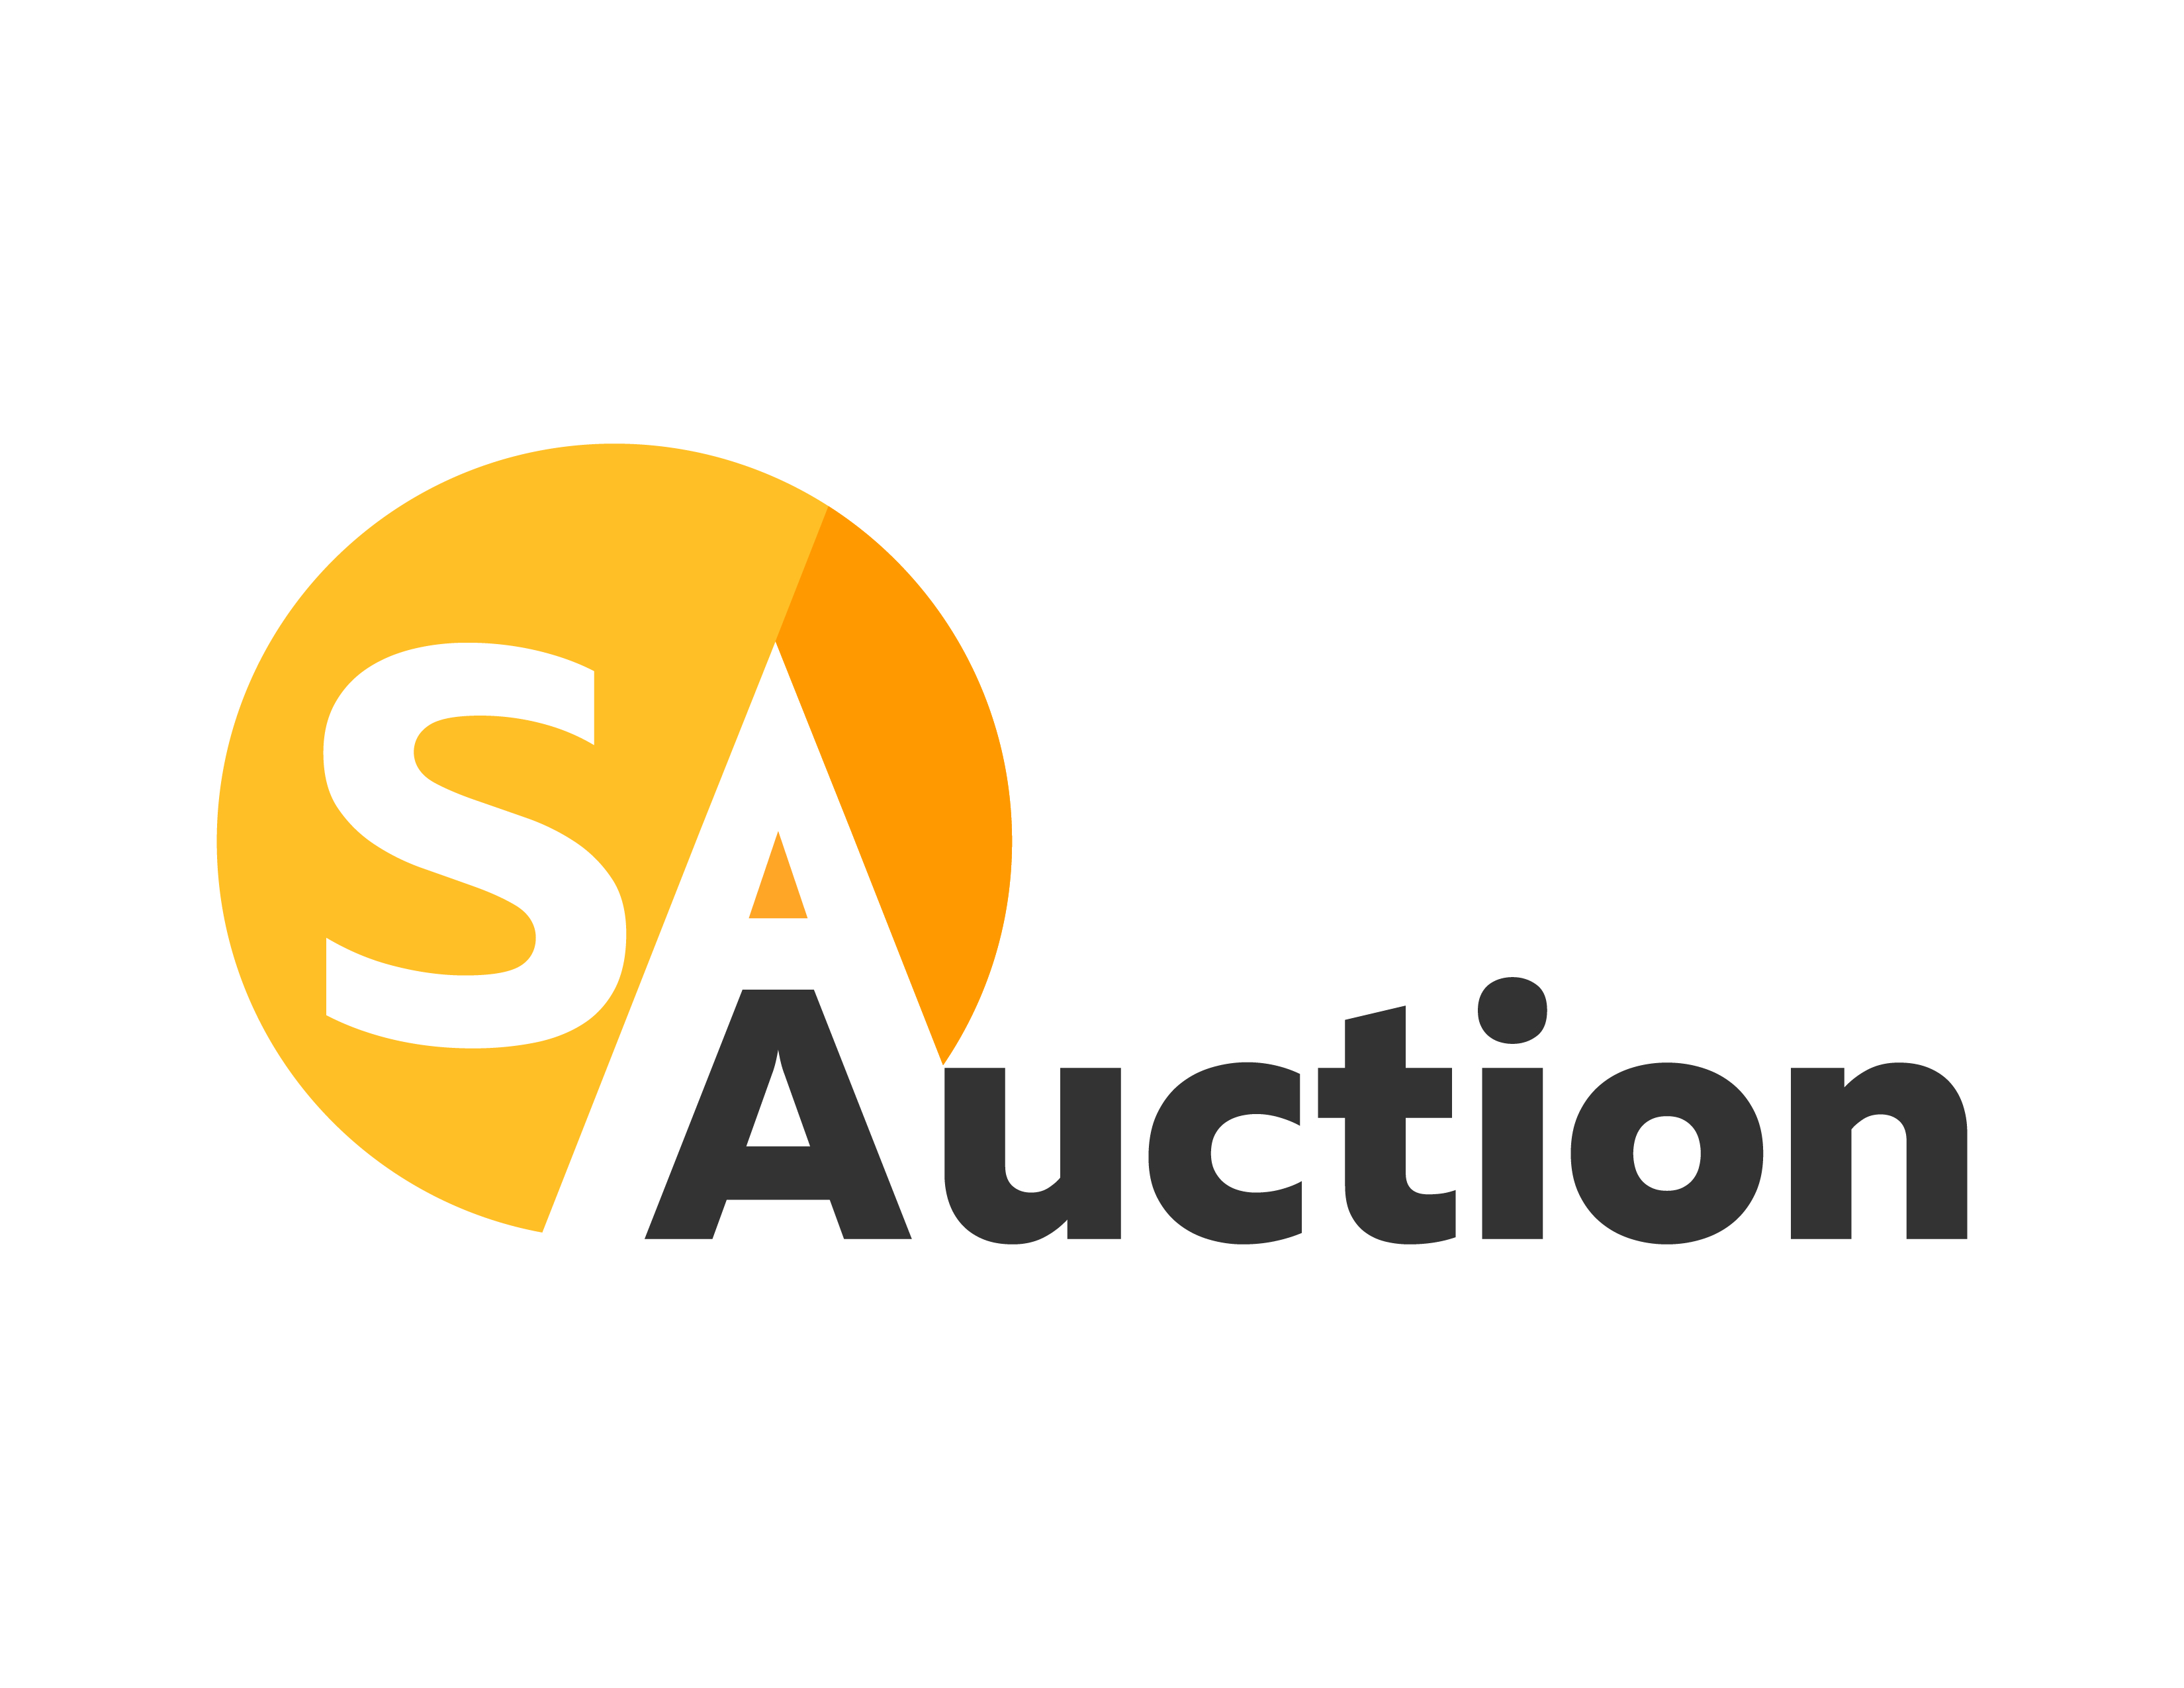 Find SA Auction's adverts listed on Junk Mail